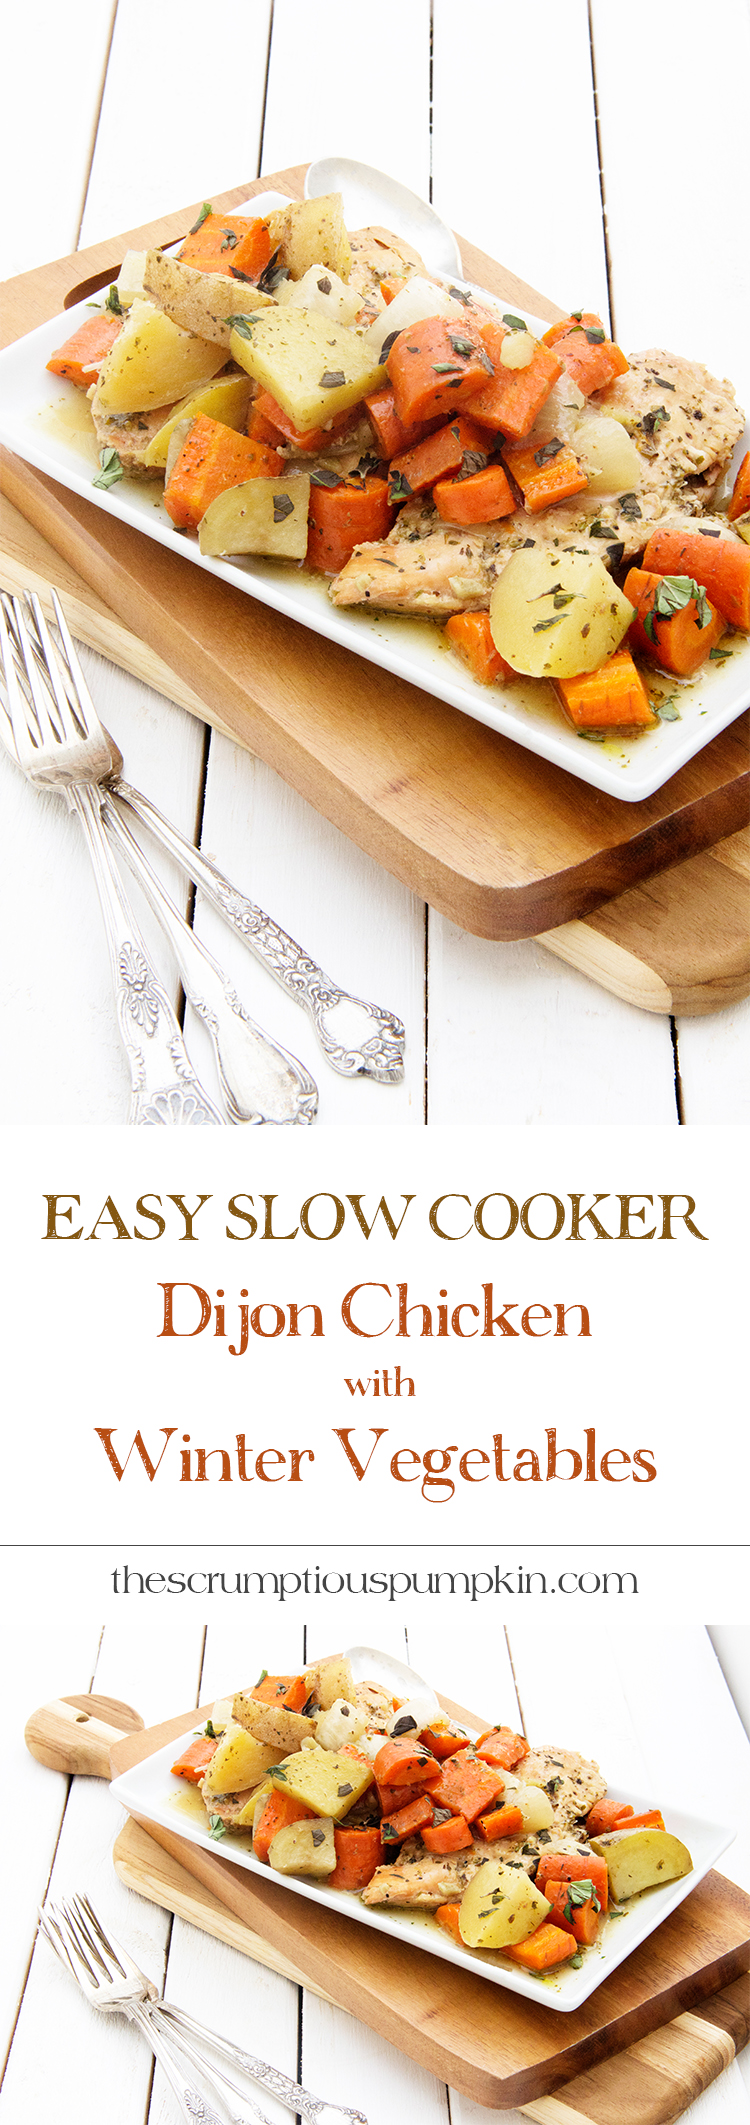 Easy-Healthy-Slow-Cooker-Dijon-Chicken-with-Winter-Vegetables